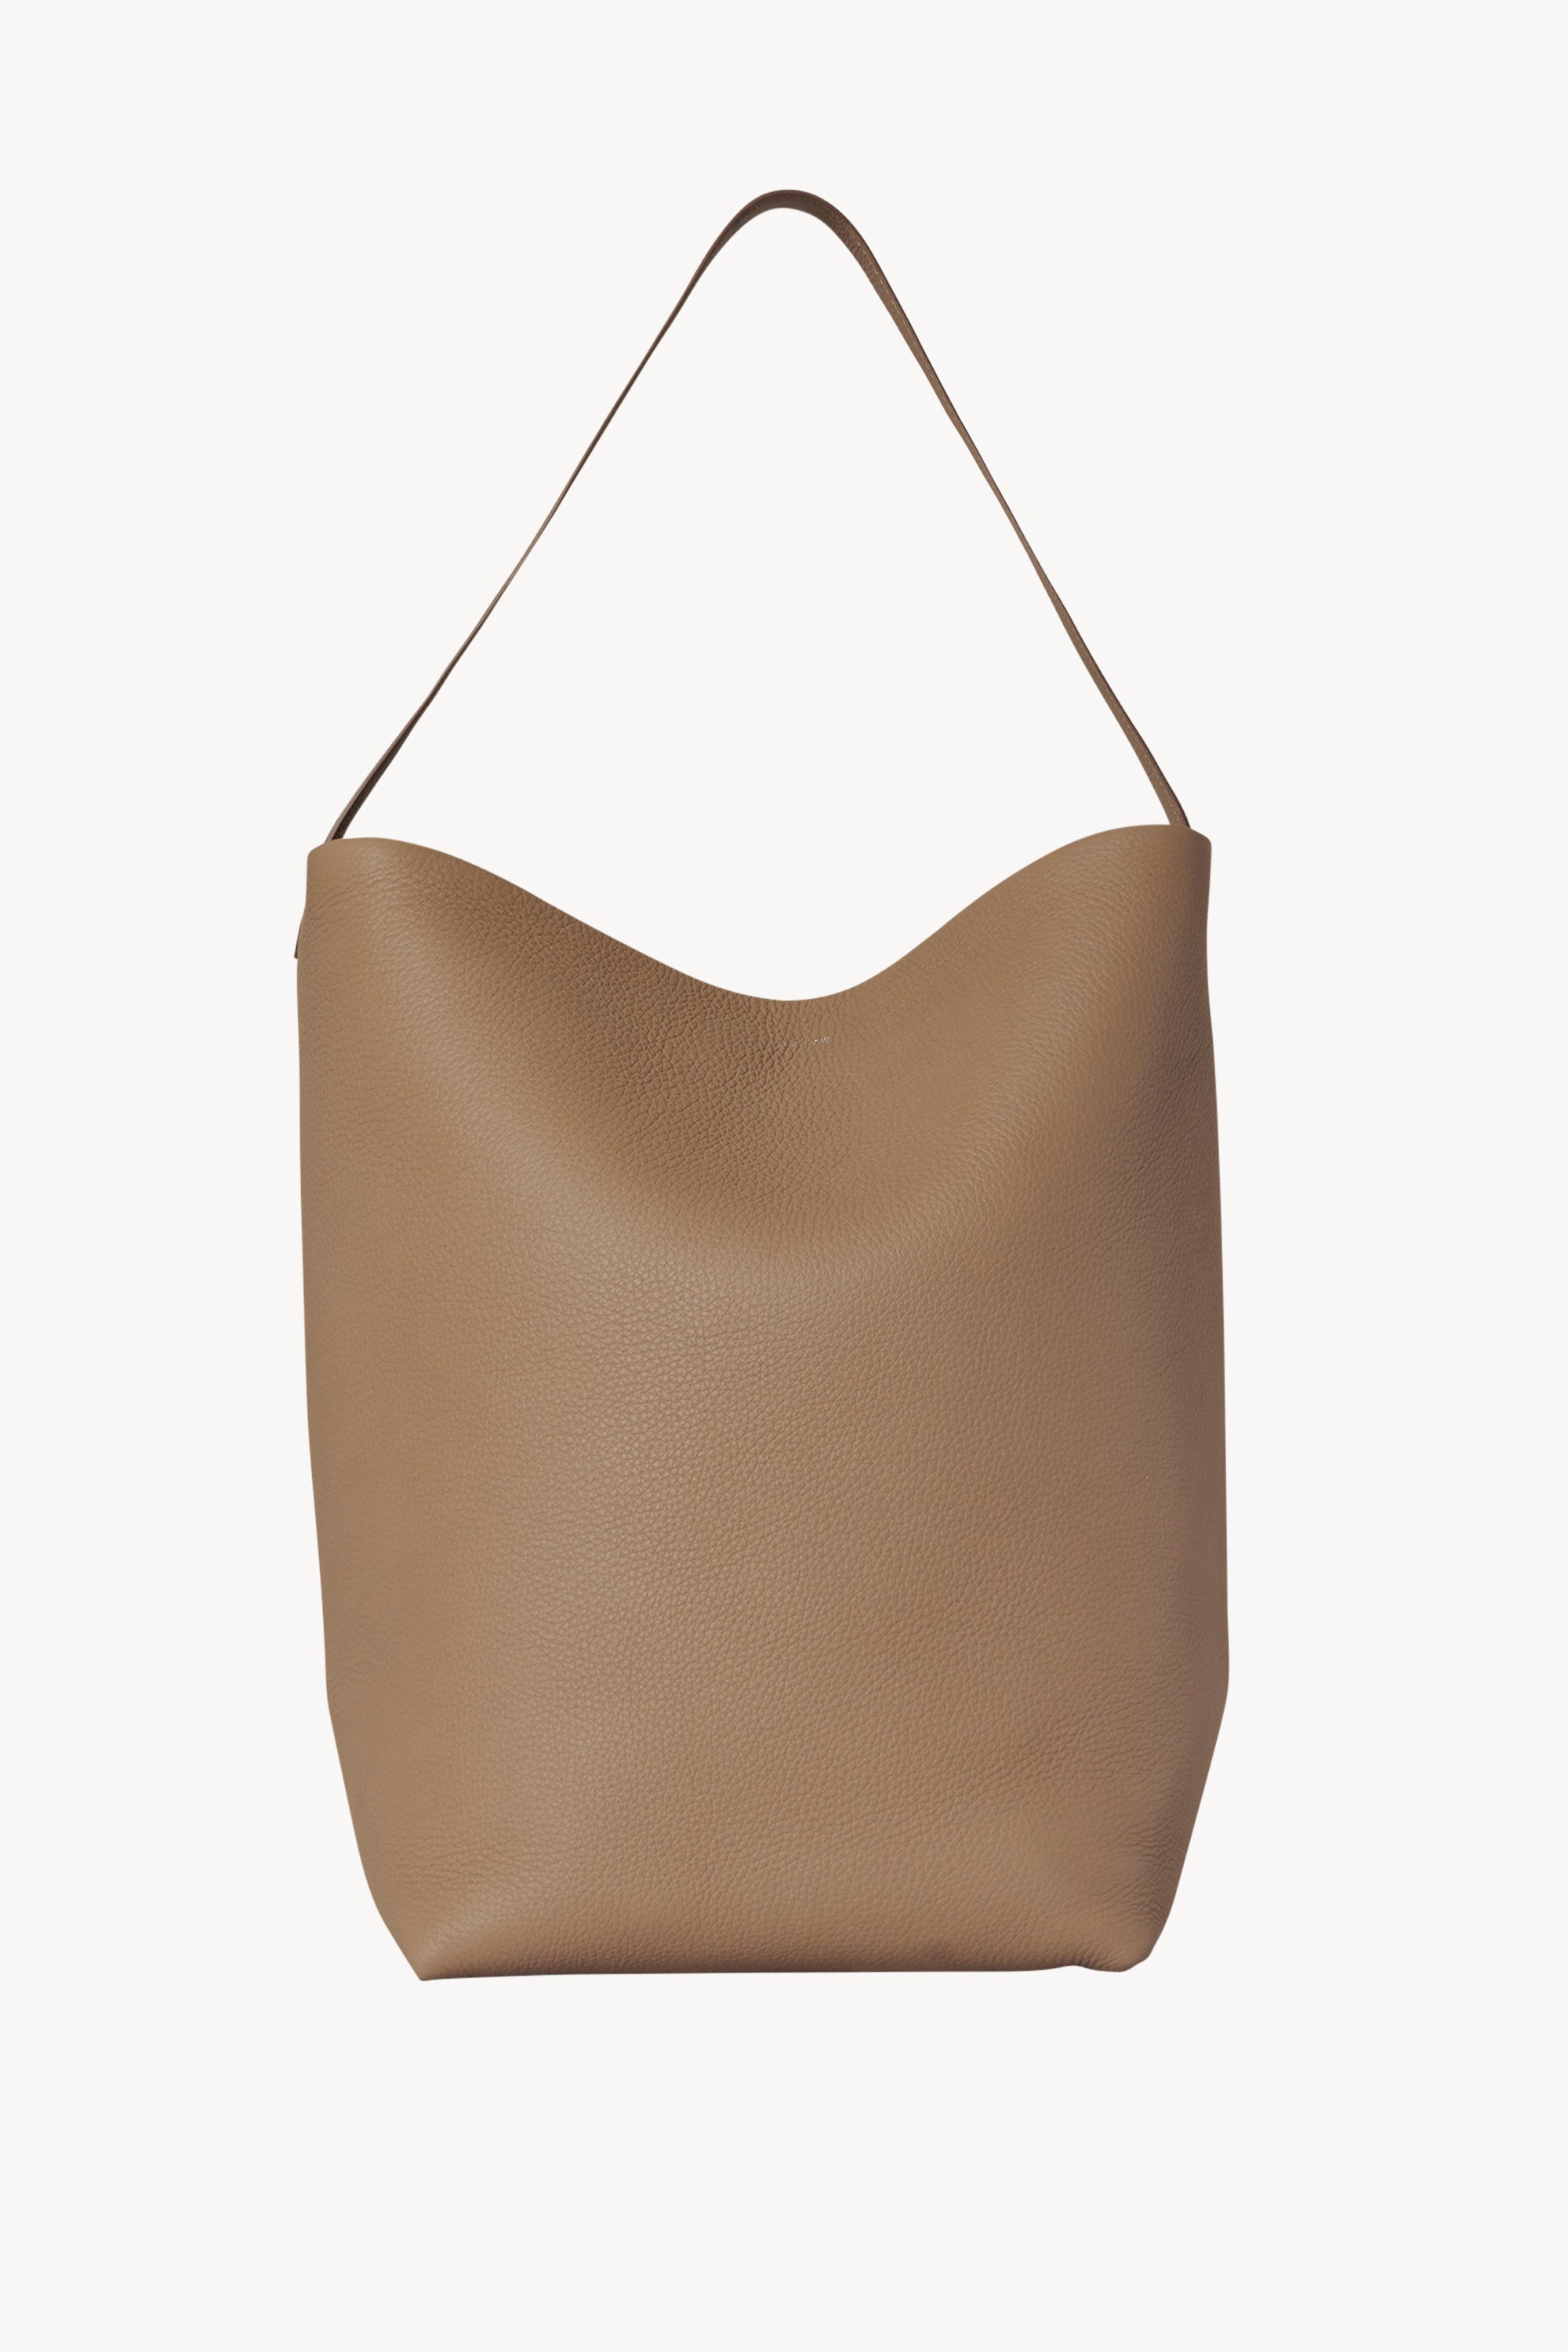 The Row Medium North South Park Tote Bag in Taupe PLD